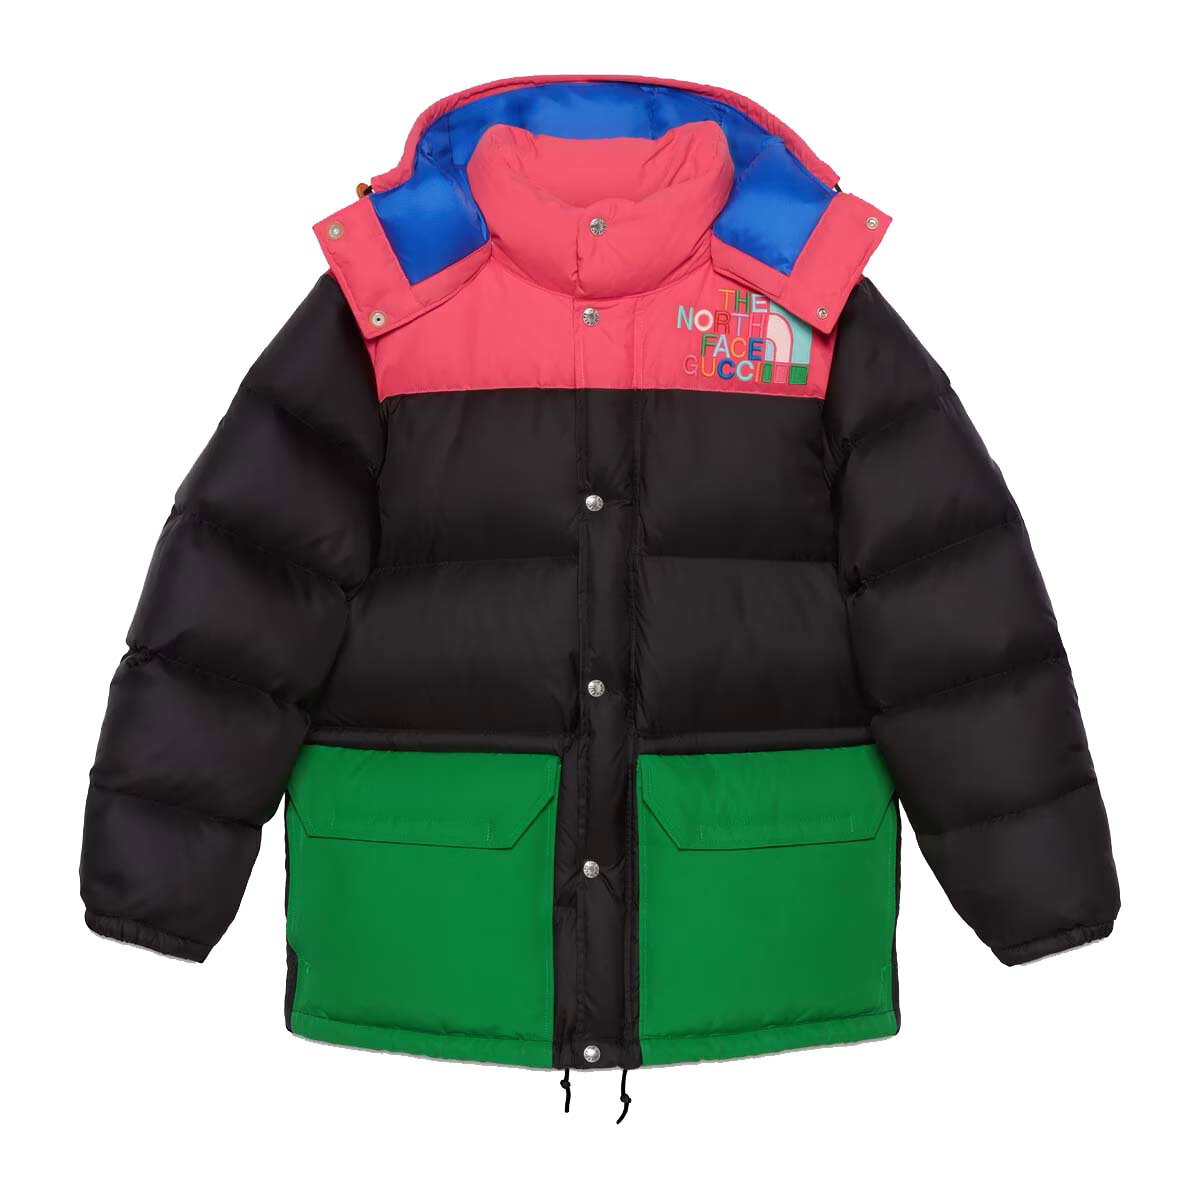 Puffer jacket Gucci The North Face x Down Coat 663895 XAADJ 4394 